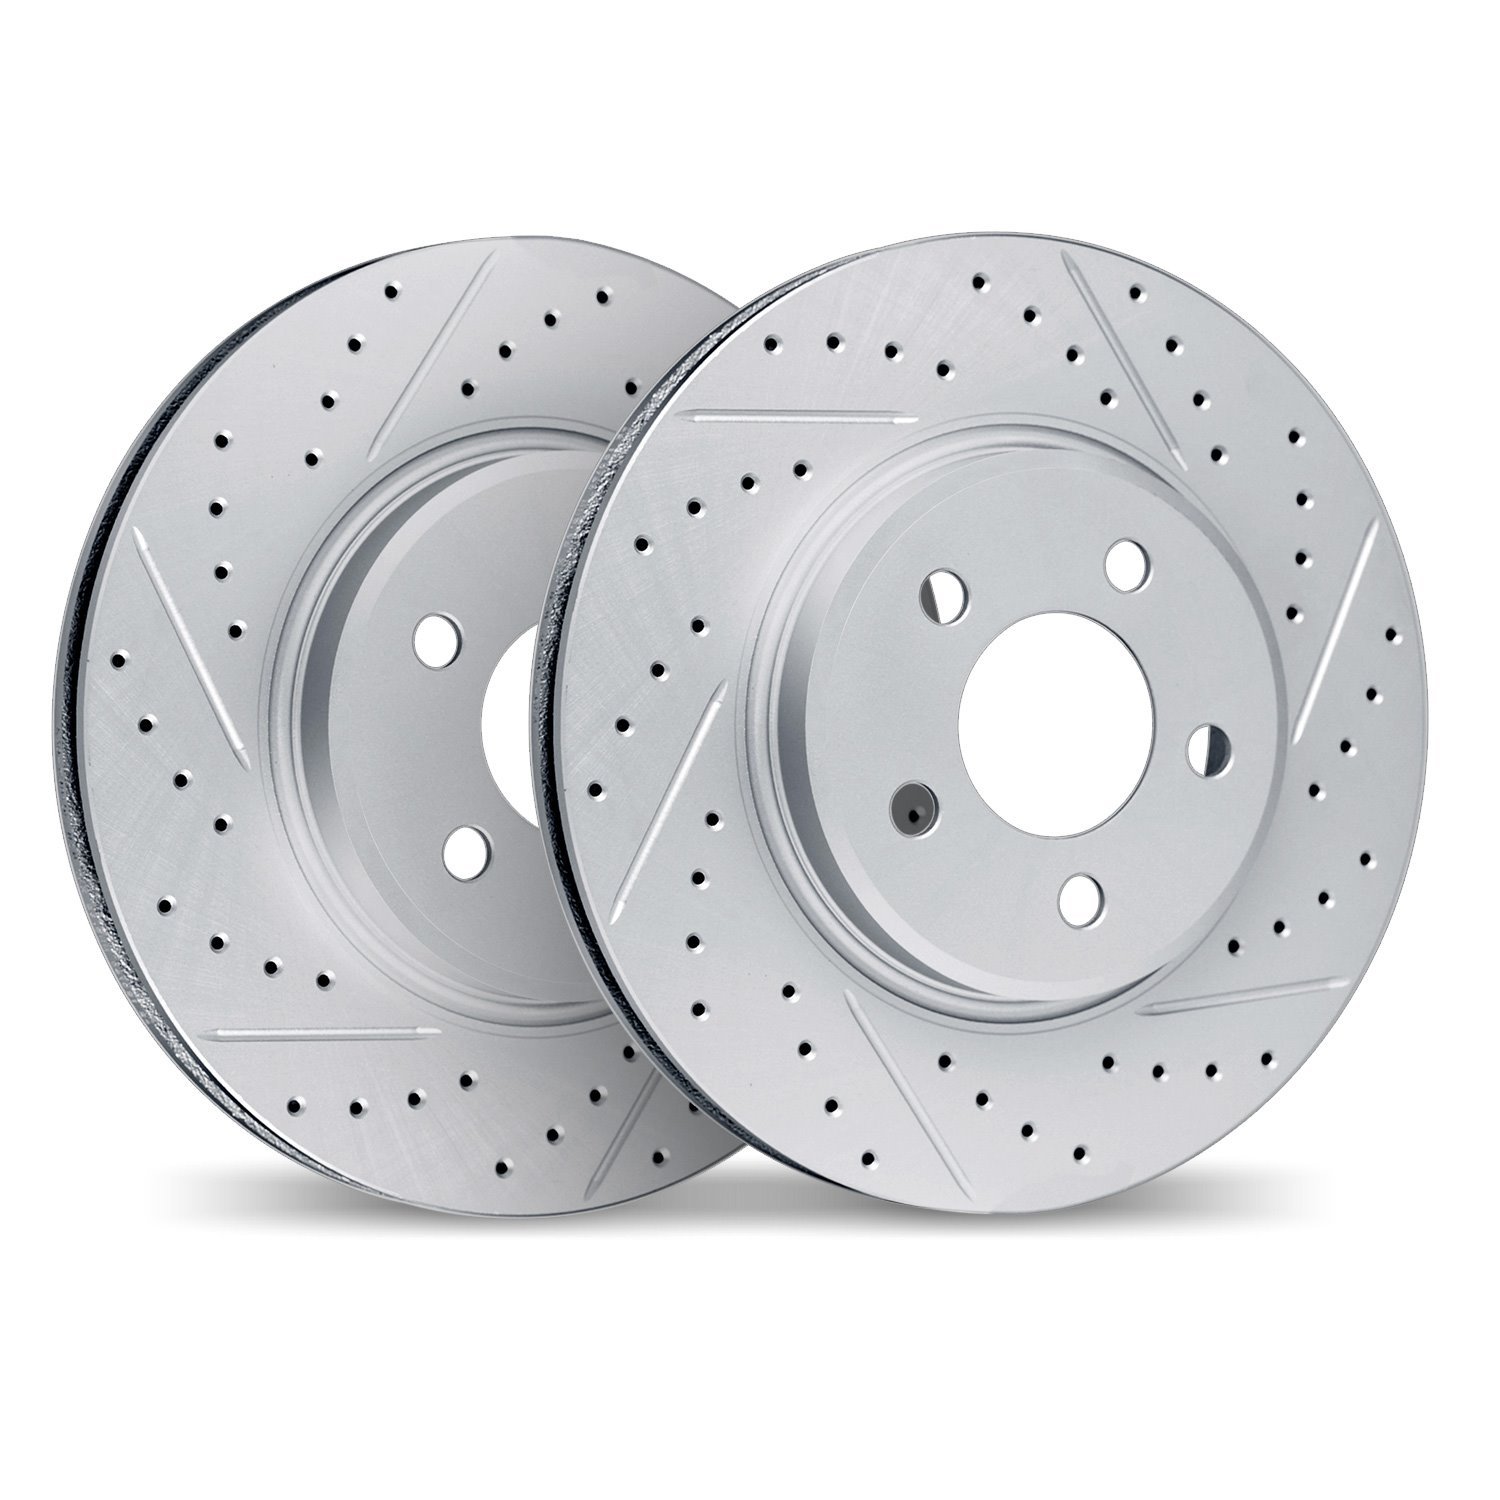 2002-54162 Geoperformance Drilled/Slotted Brake Rotors, 2004-2007 Ford/Lincoln/Mercury/Mazda, Position: Rear